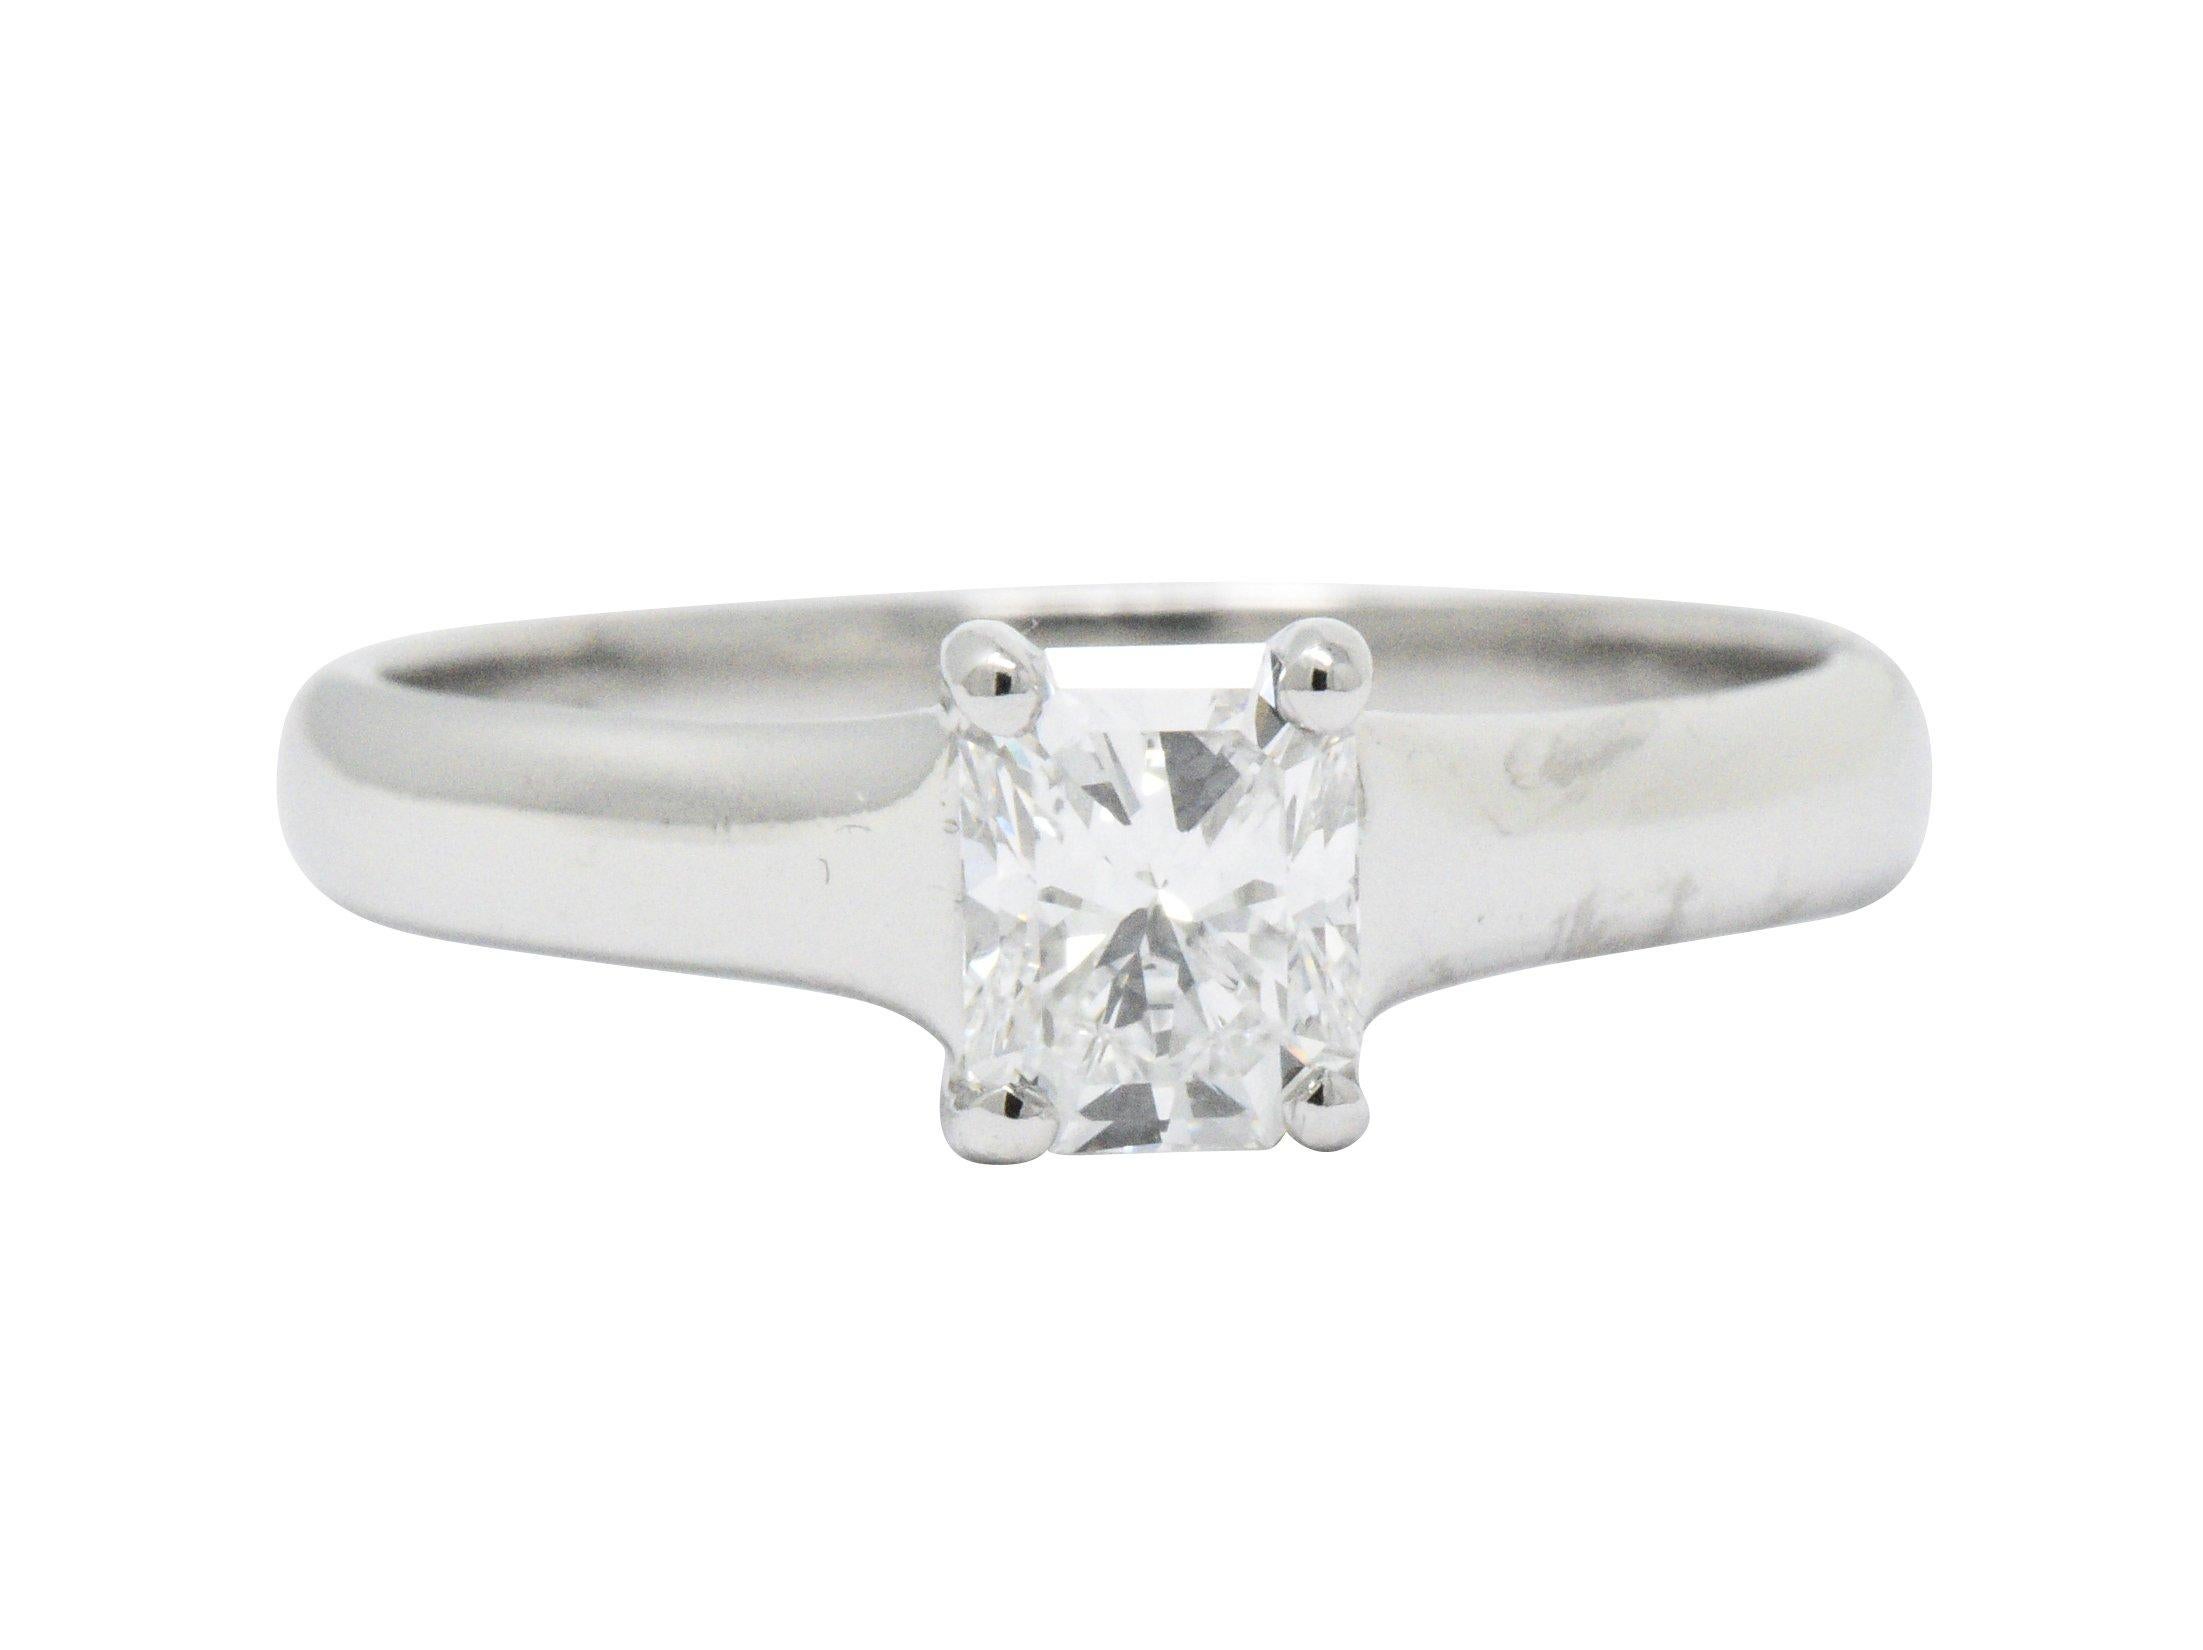 Centering an internally flawless radiant cut Lucida diamond weighing 0.59 carat with remarkable F color

Diamond is laser inscribed 'Lucida' and with the GIA and Tiffany registration numbers

Prong set in a cathedral style mounting that features a